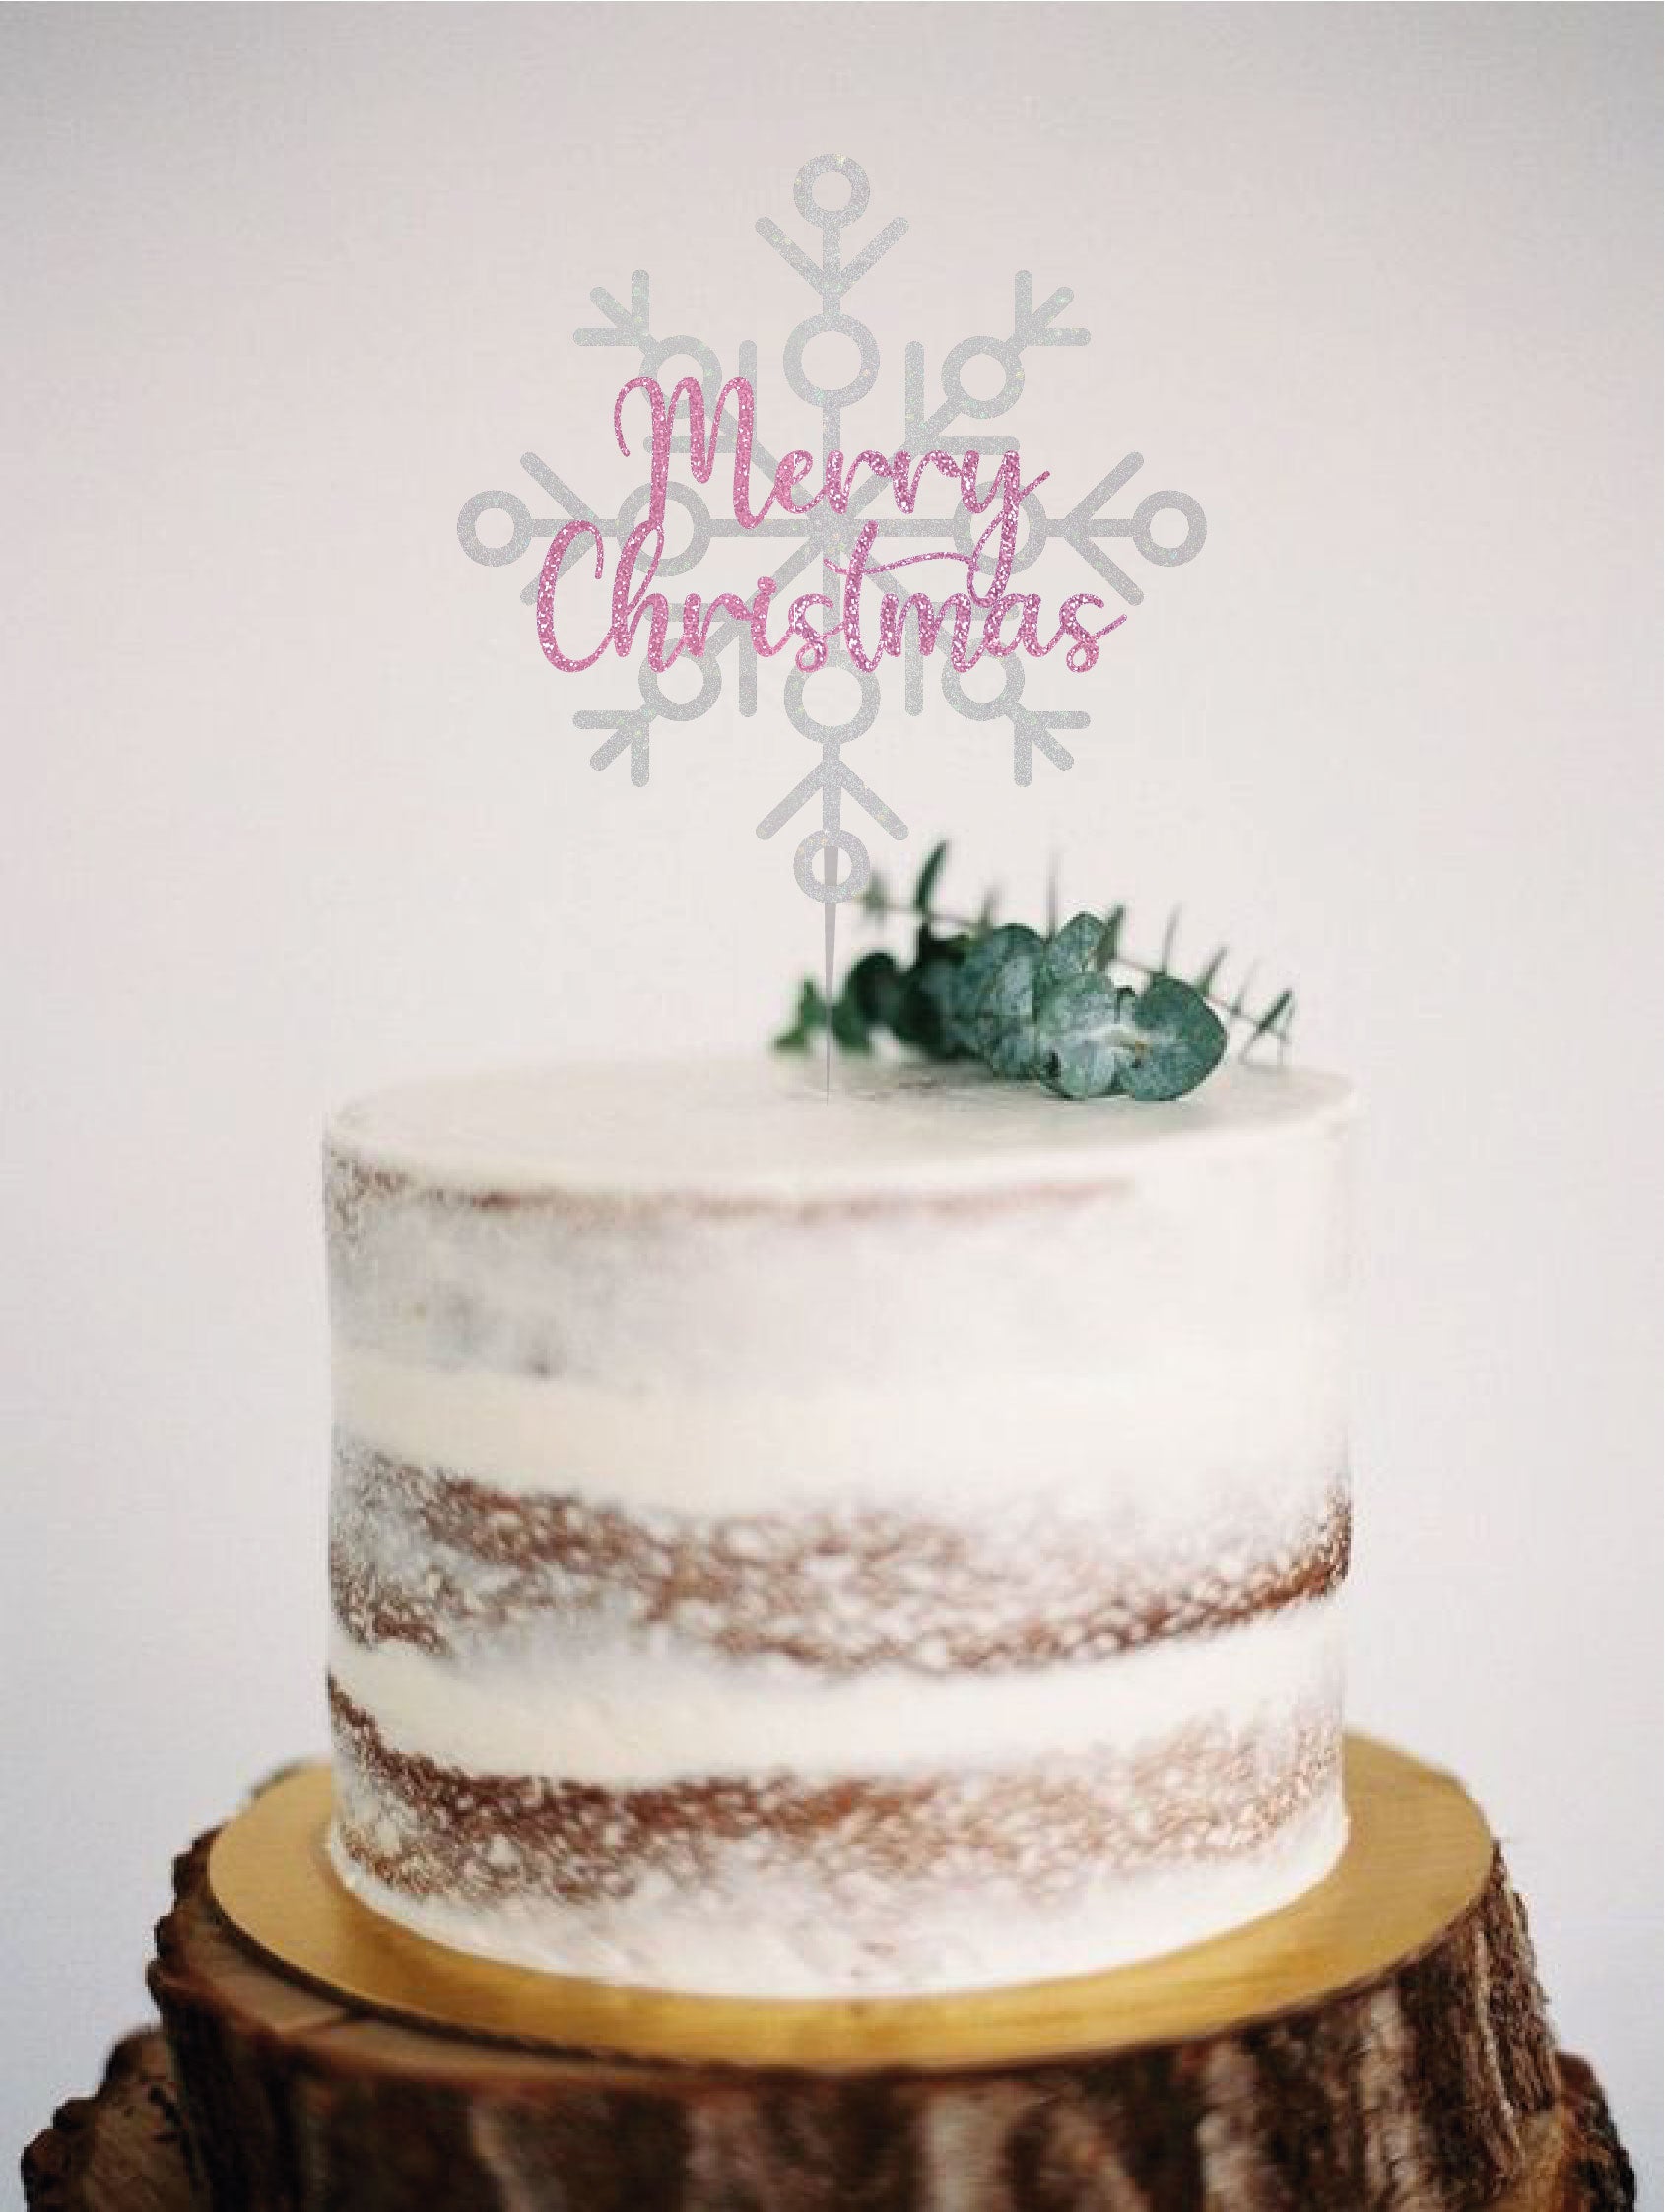 Style It Simply Premium Multi-color 'Merry Christmas' Cake Topper with Snowflake